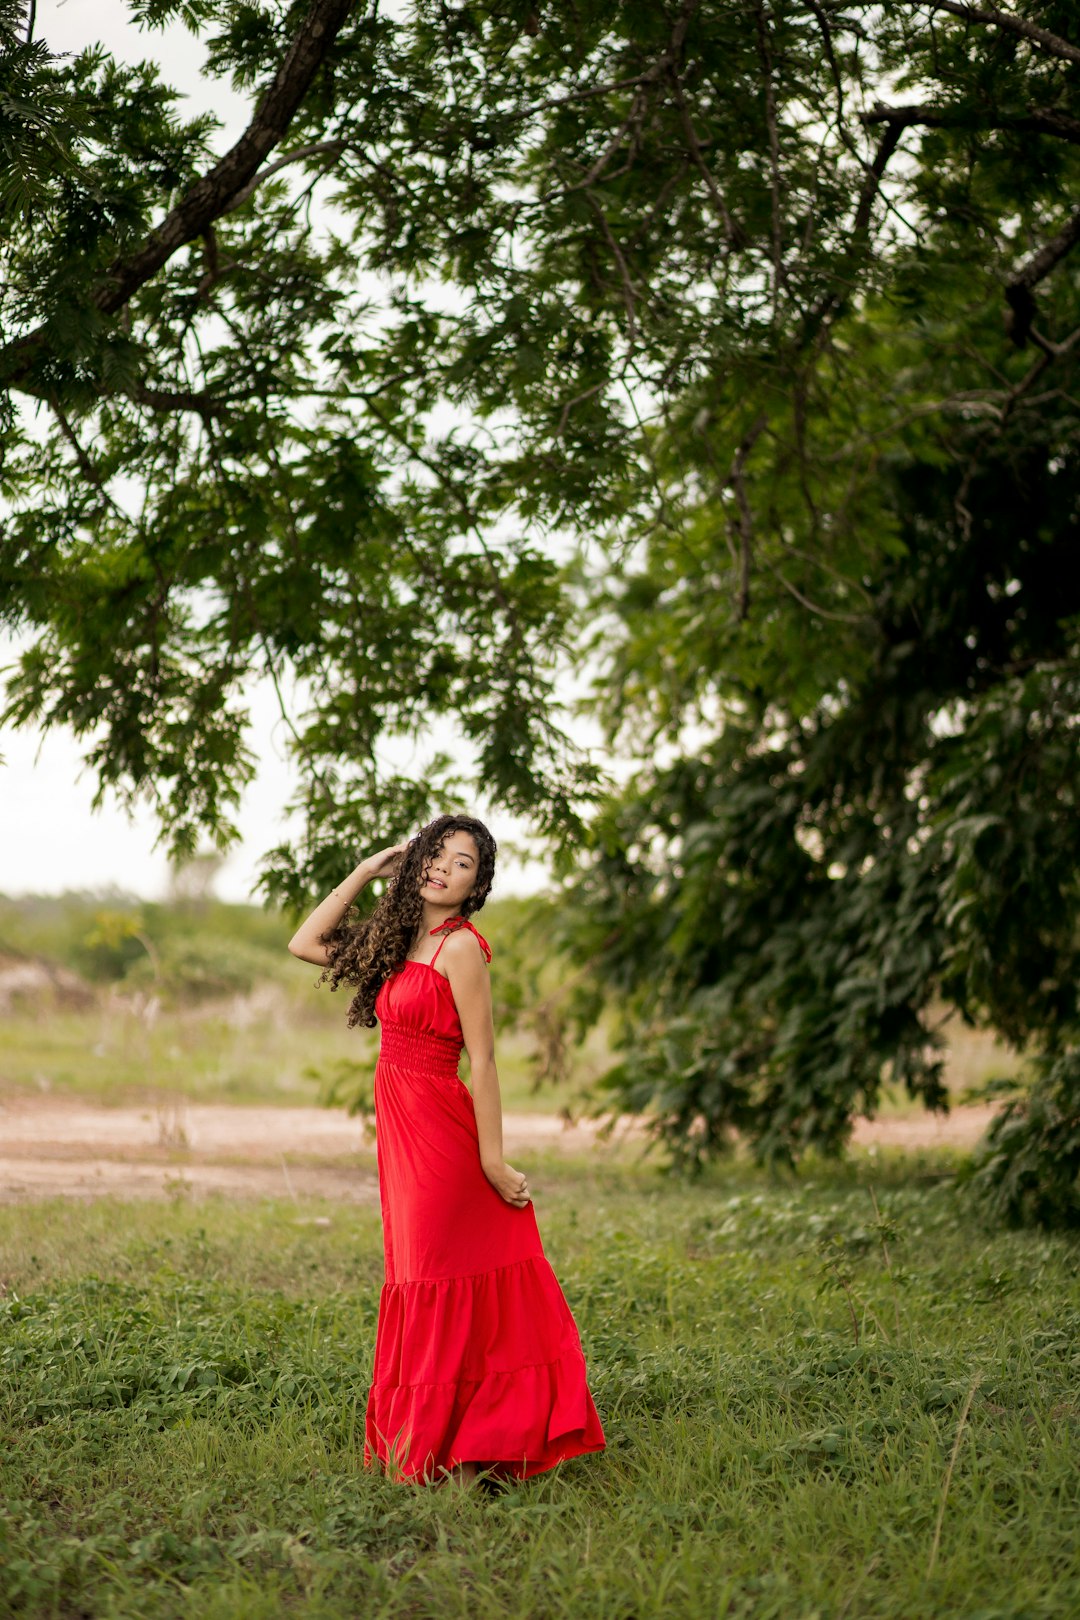 woman in red sleeveless dress standing on green grass field during daytime